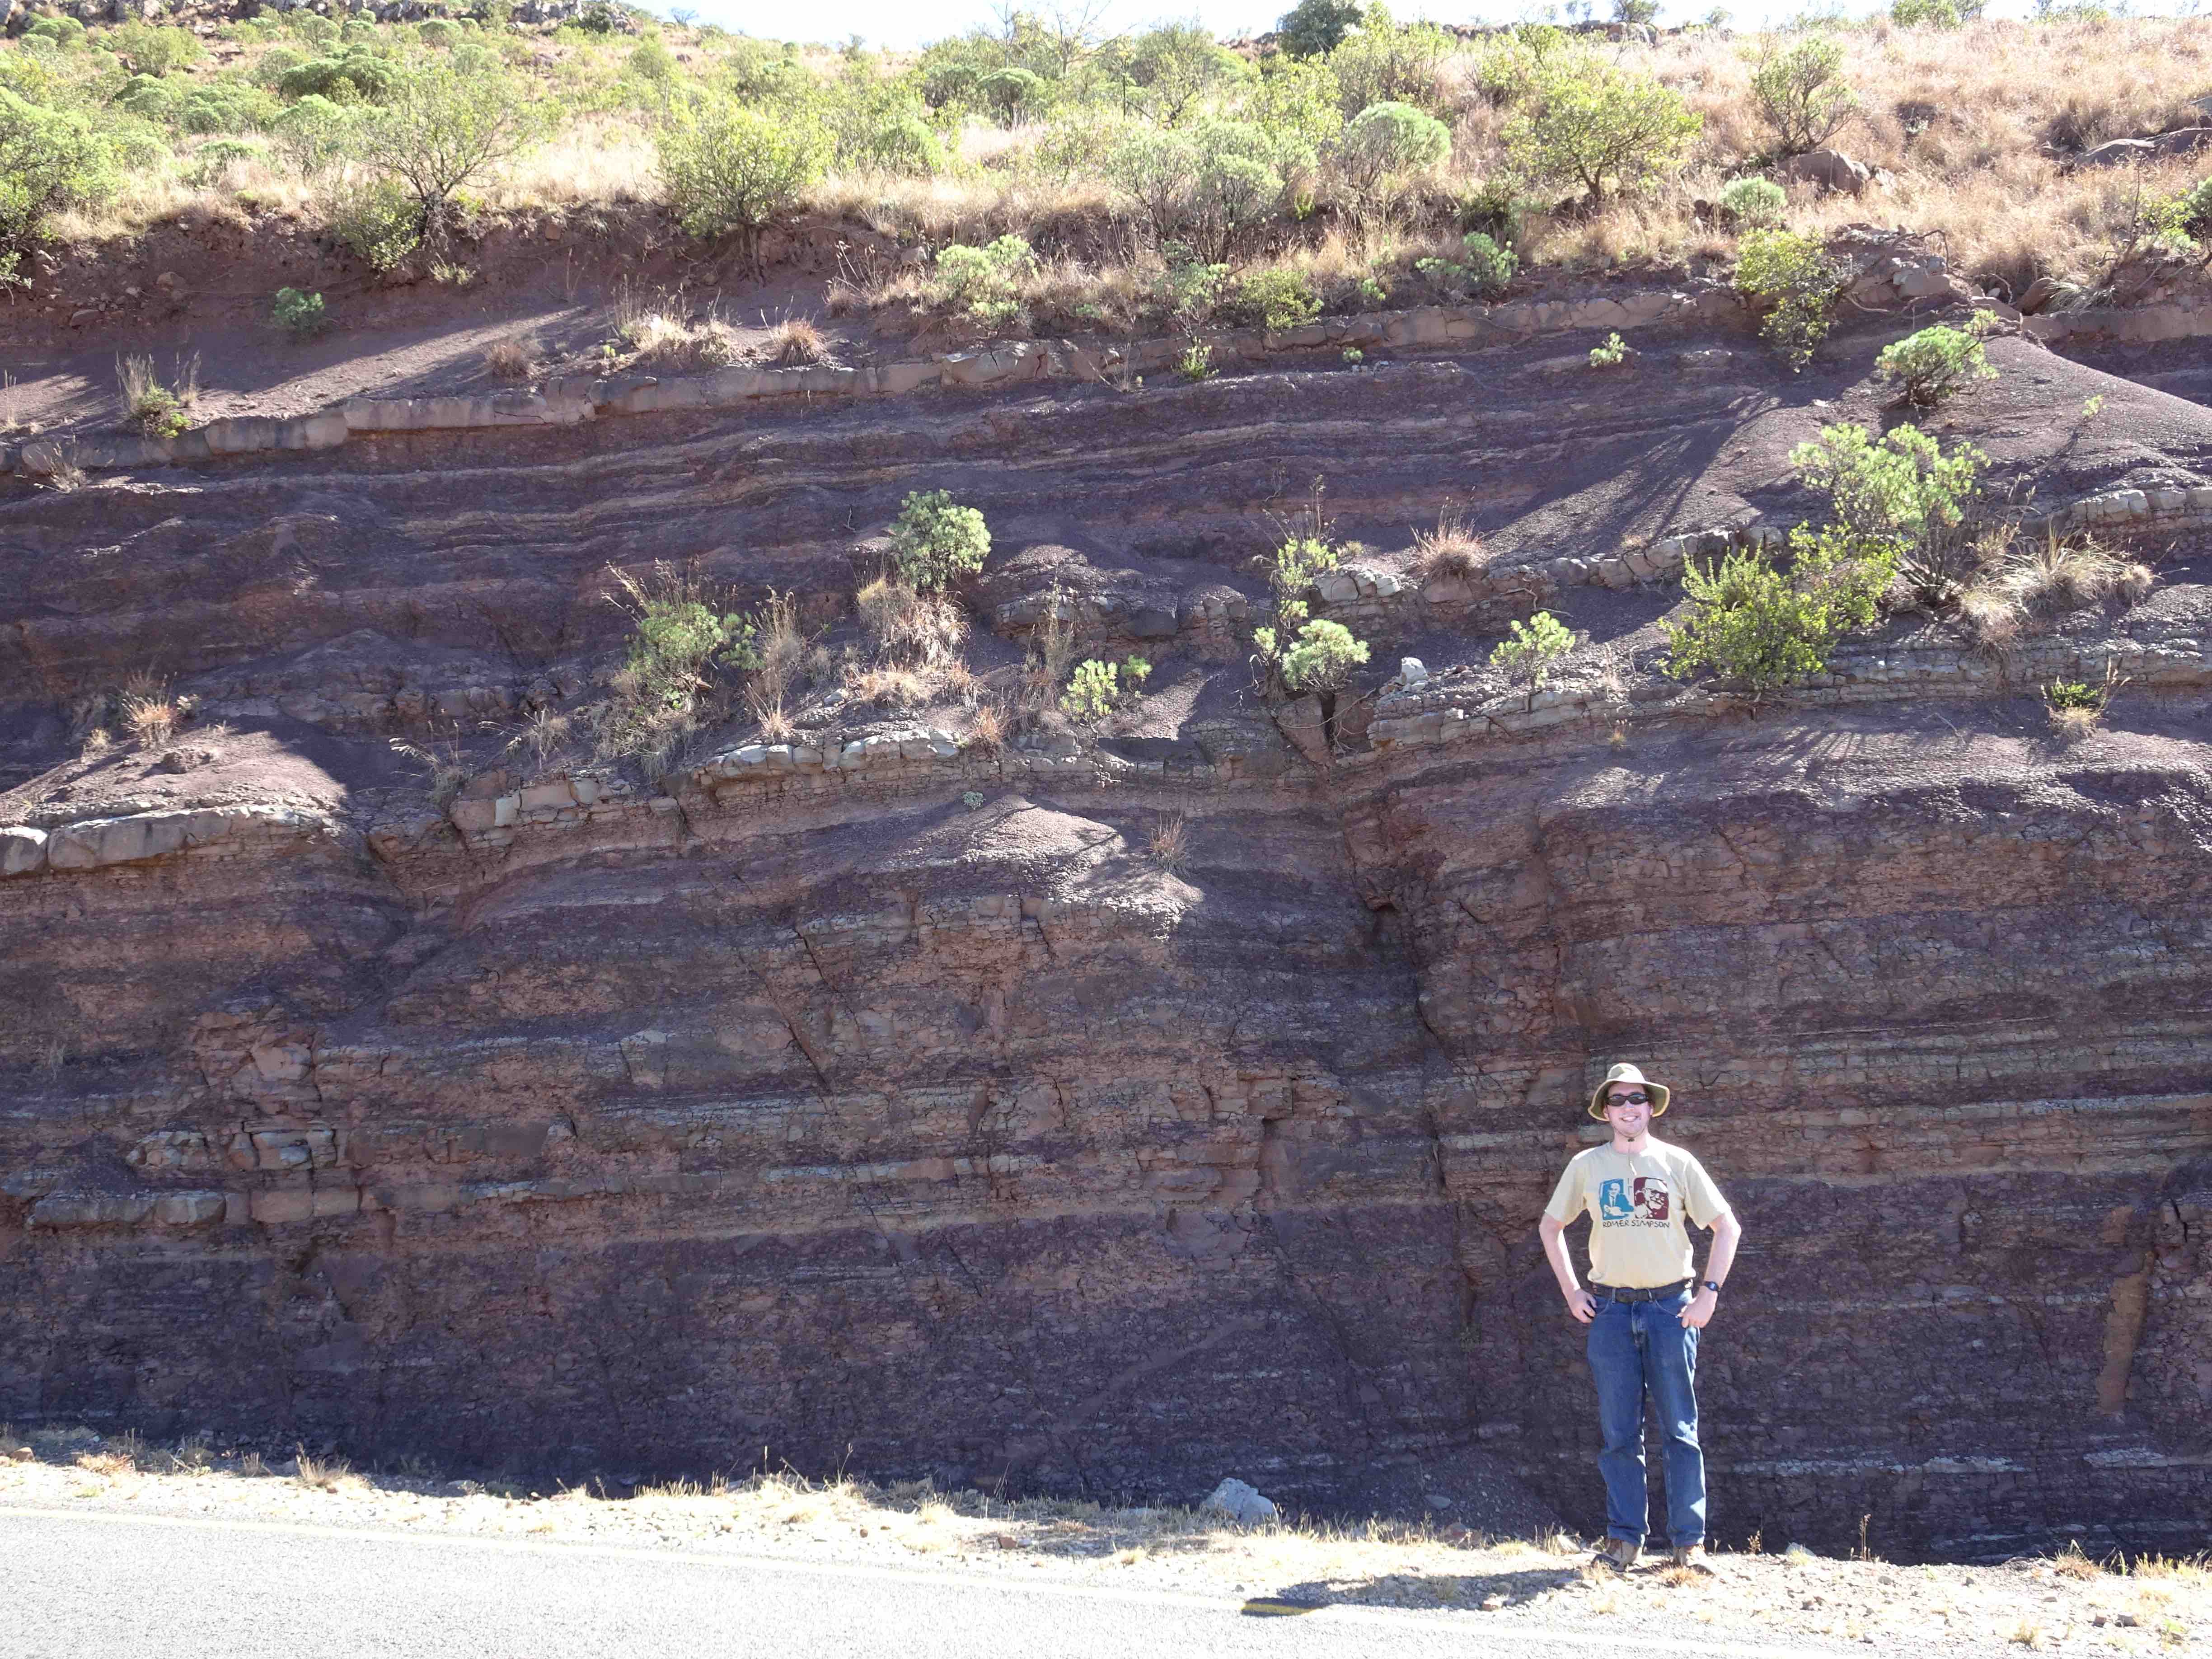 Dr. Kammerer standing next to rocks from the Triassic-Jurassic succession in South Africa.